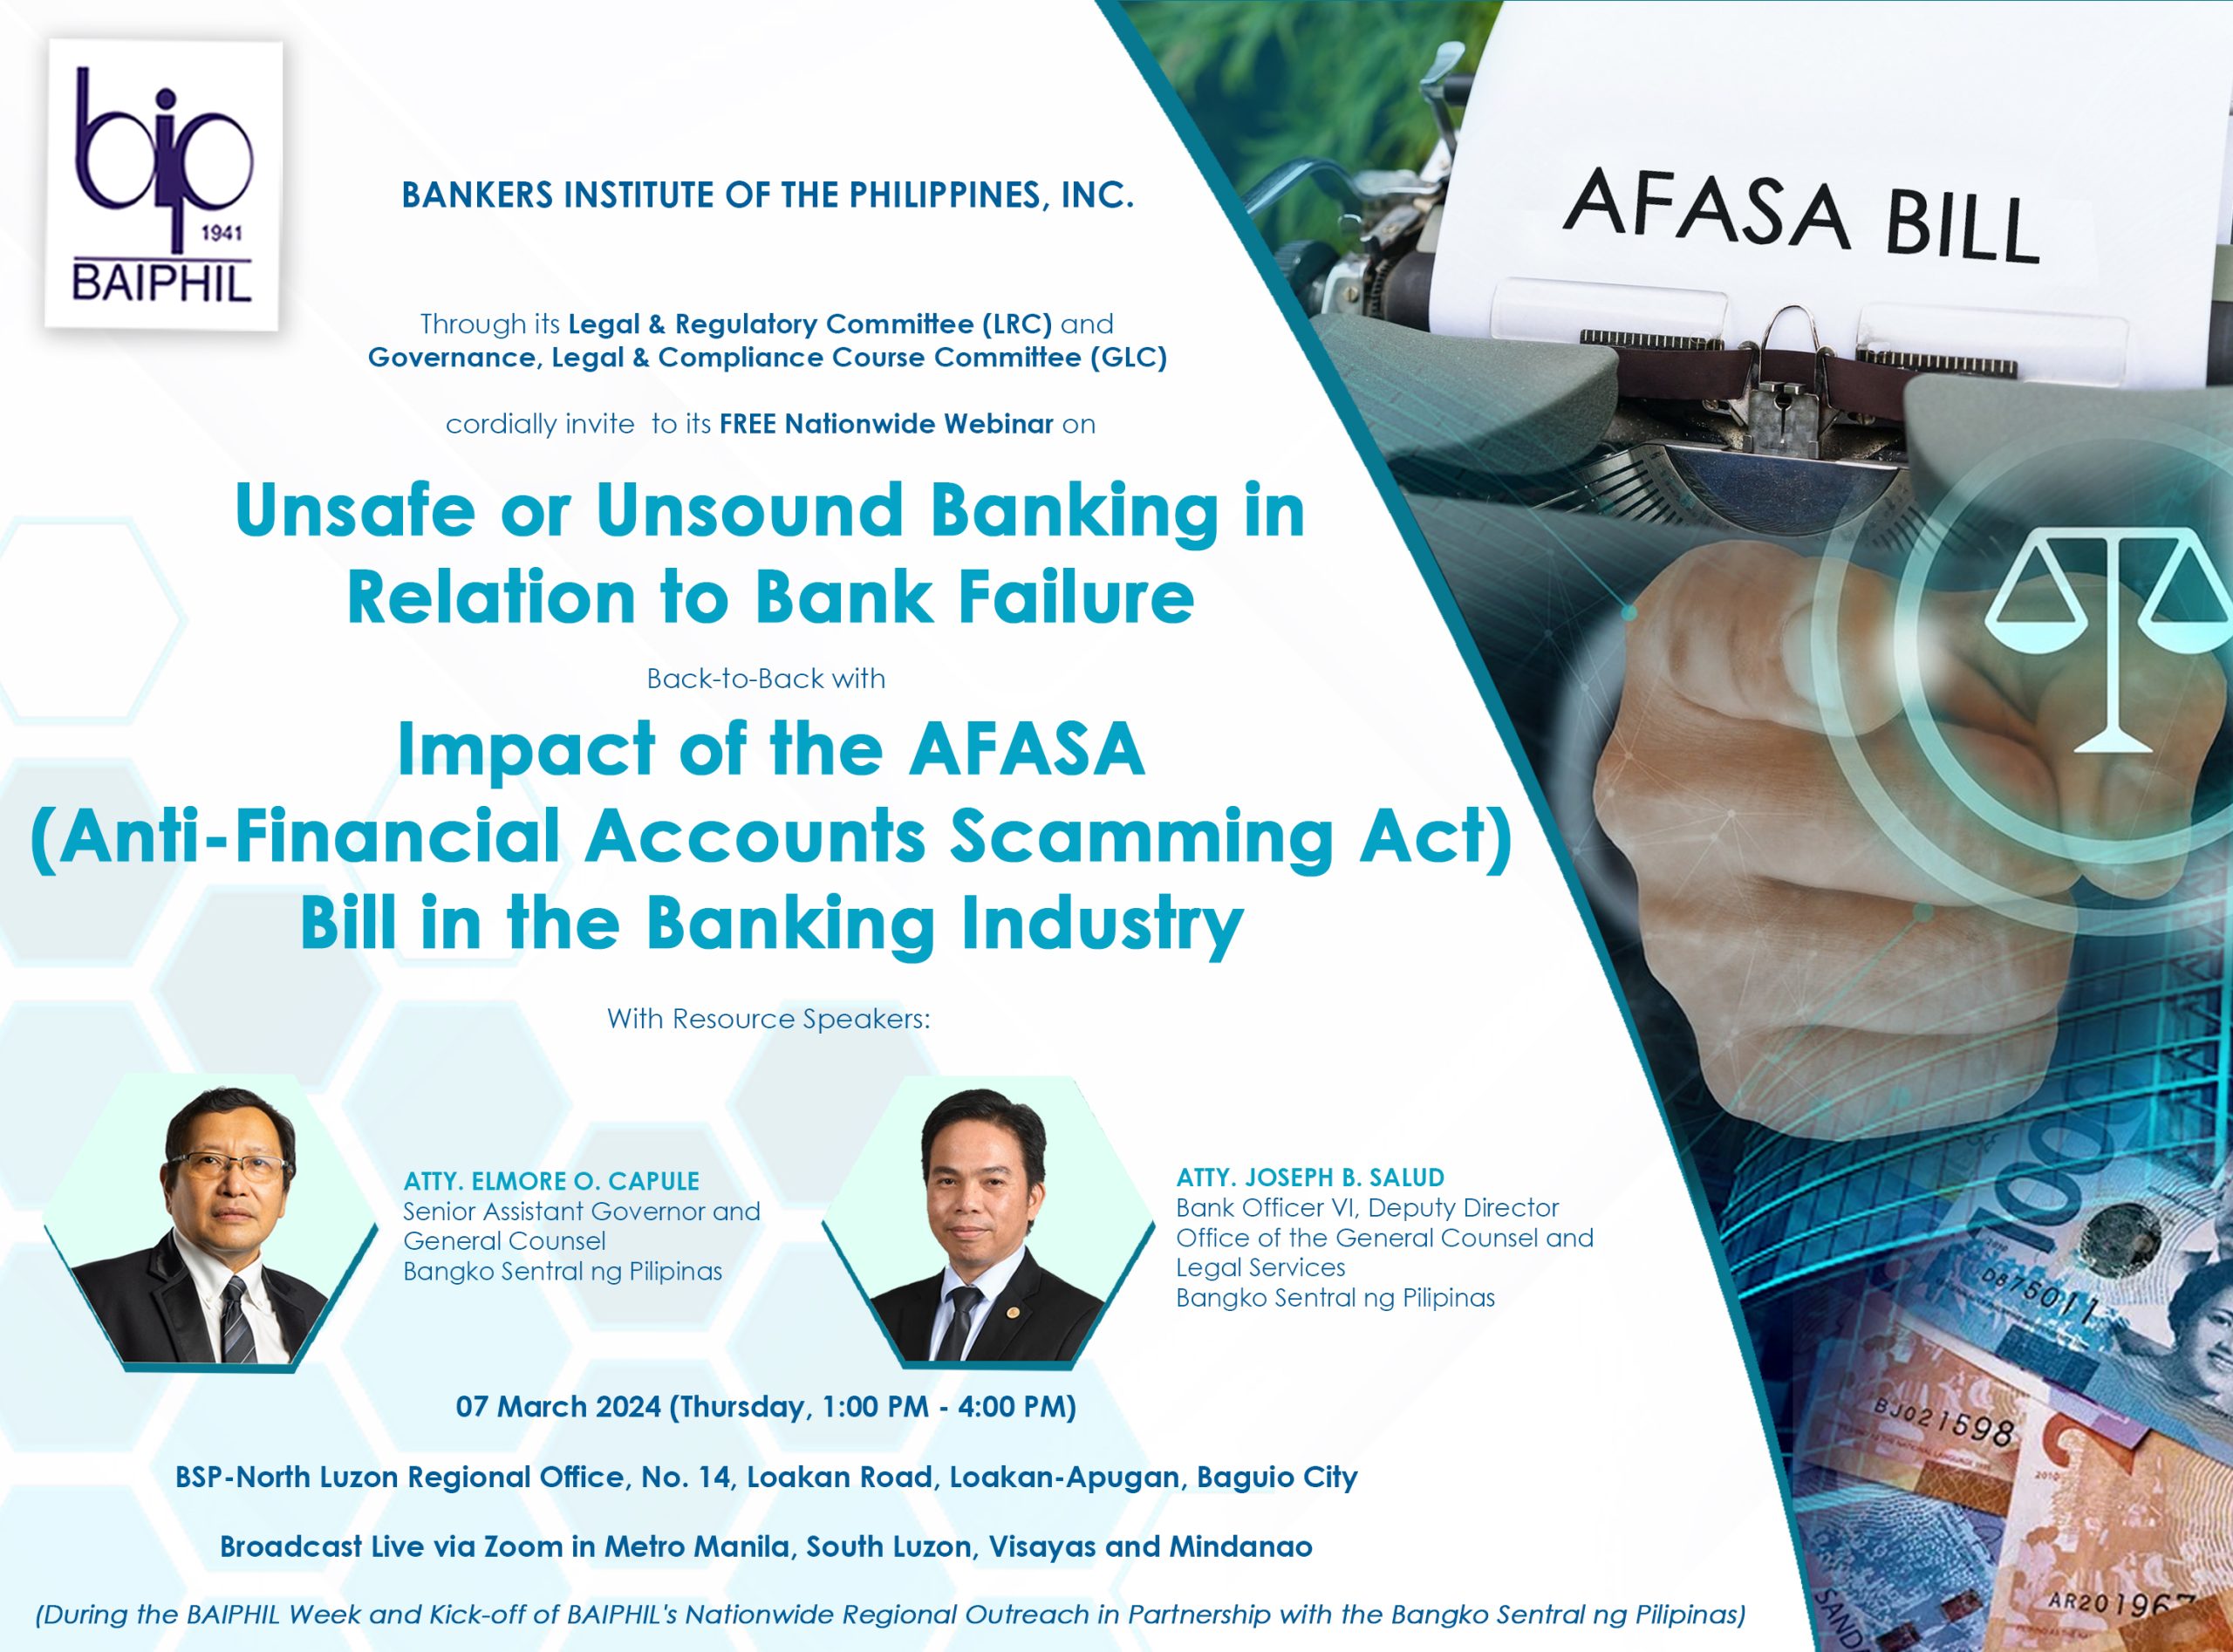 Unsafe or Unsound Banking in Relation to Bank Failure Back-to-Back with Impact of the AFASA (Anti-Financial Accounts Scamming Act) Bill in the Banking Industry